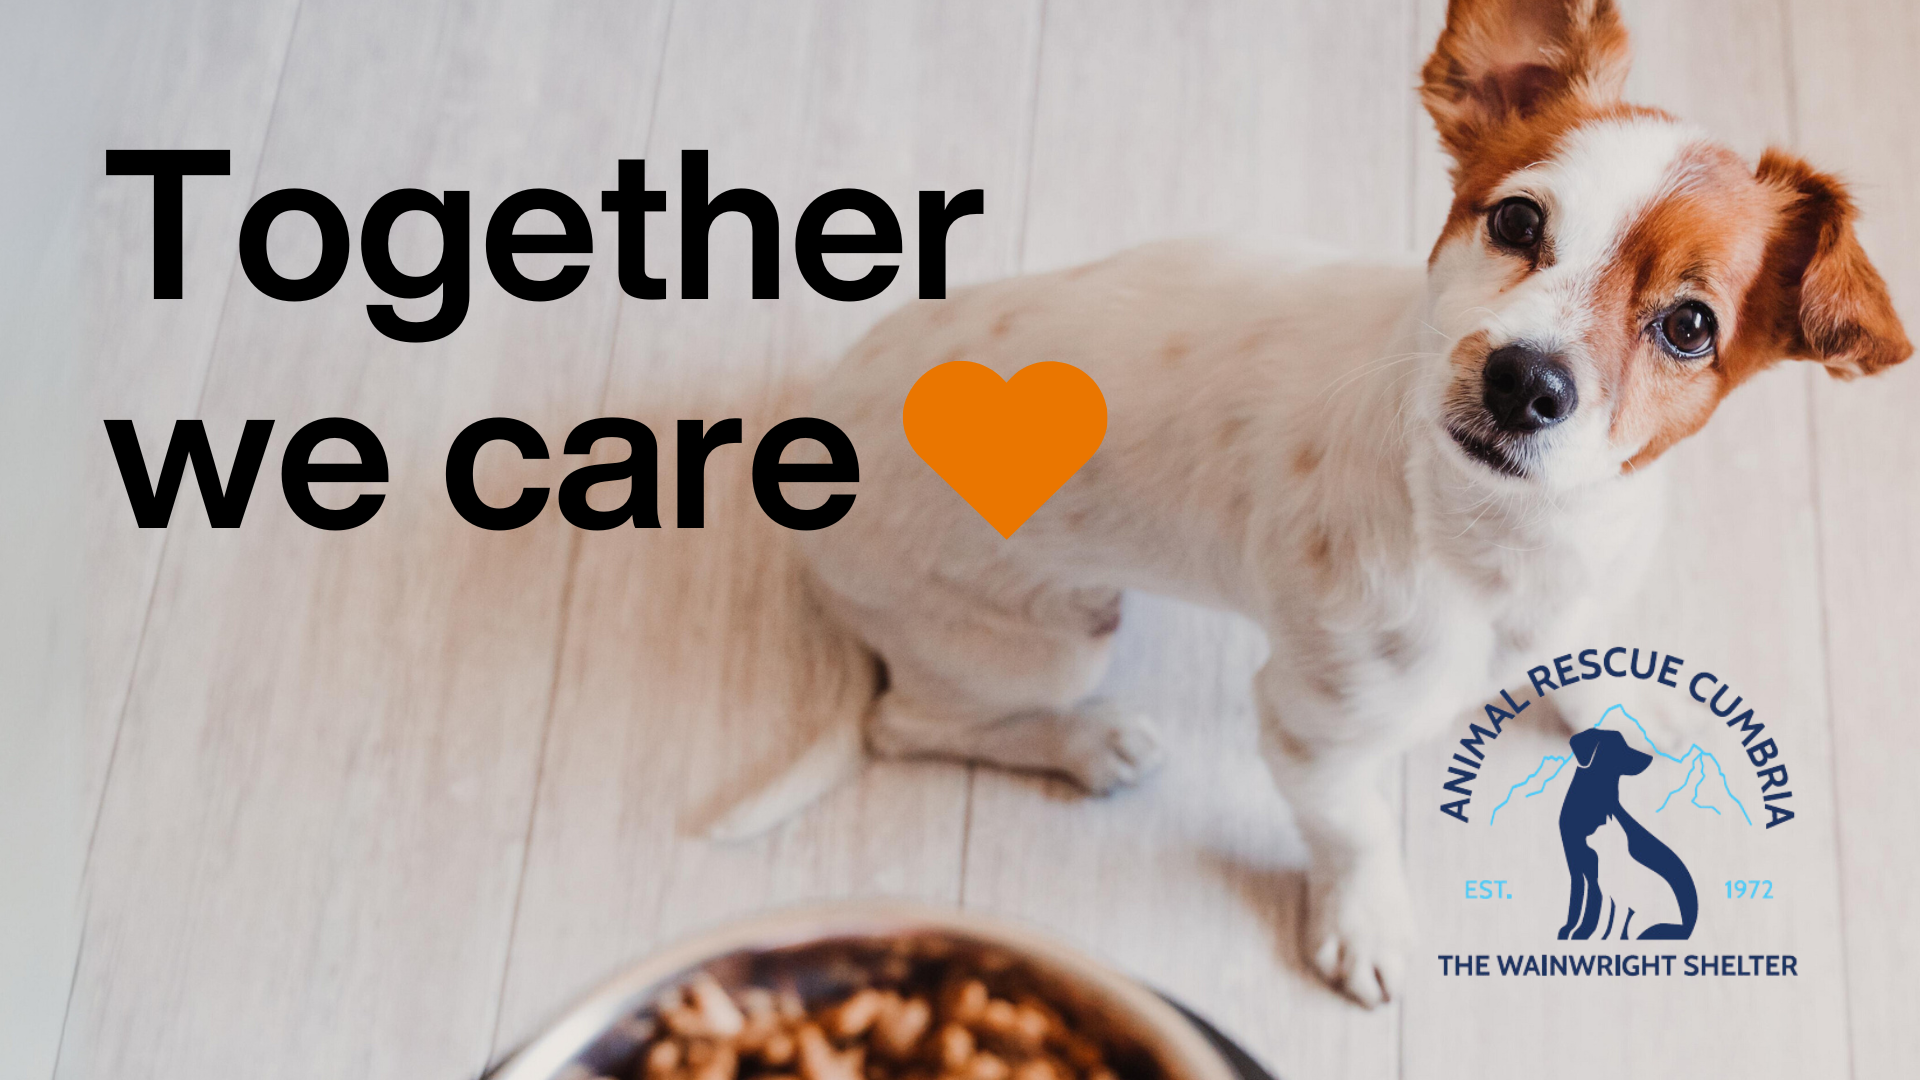 Together we care - Be part of our charity story!